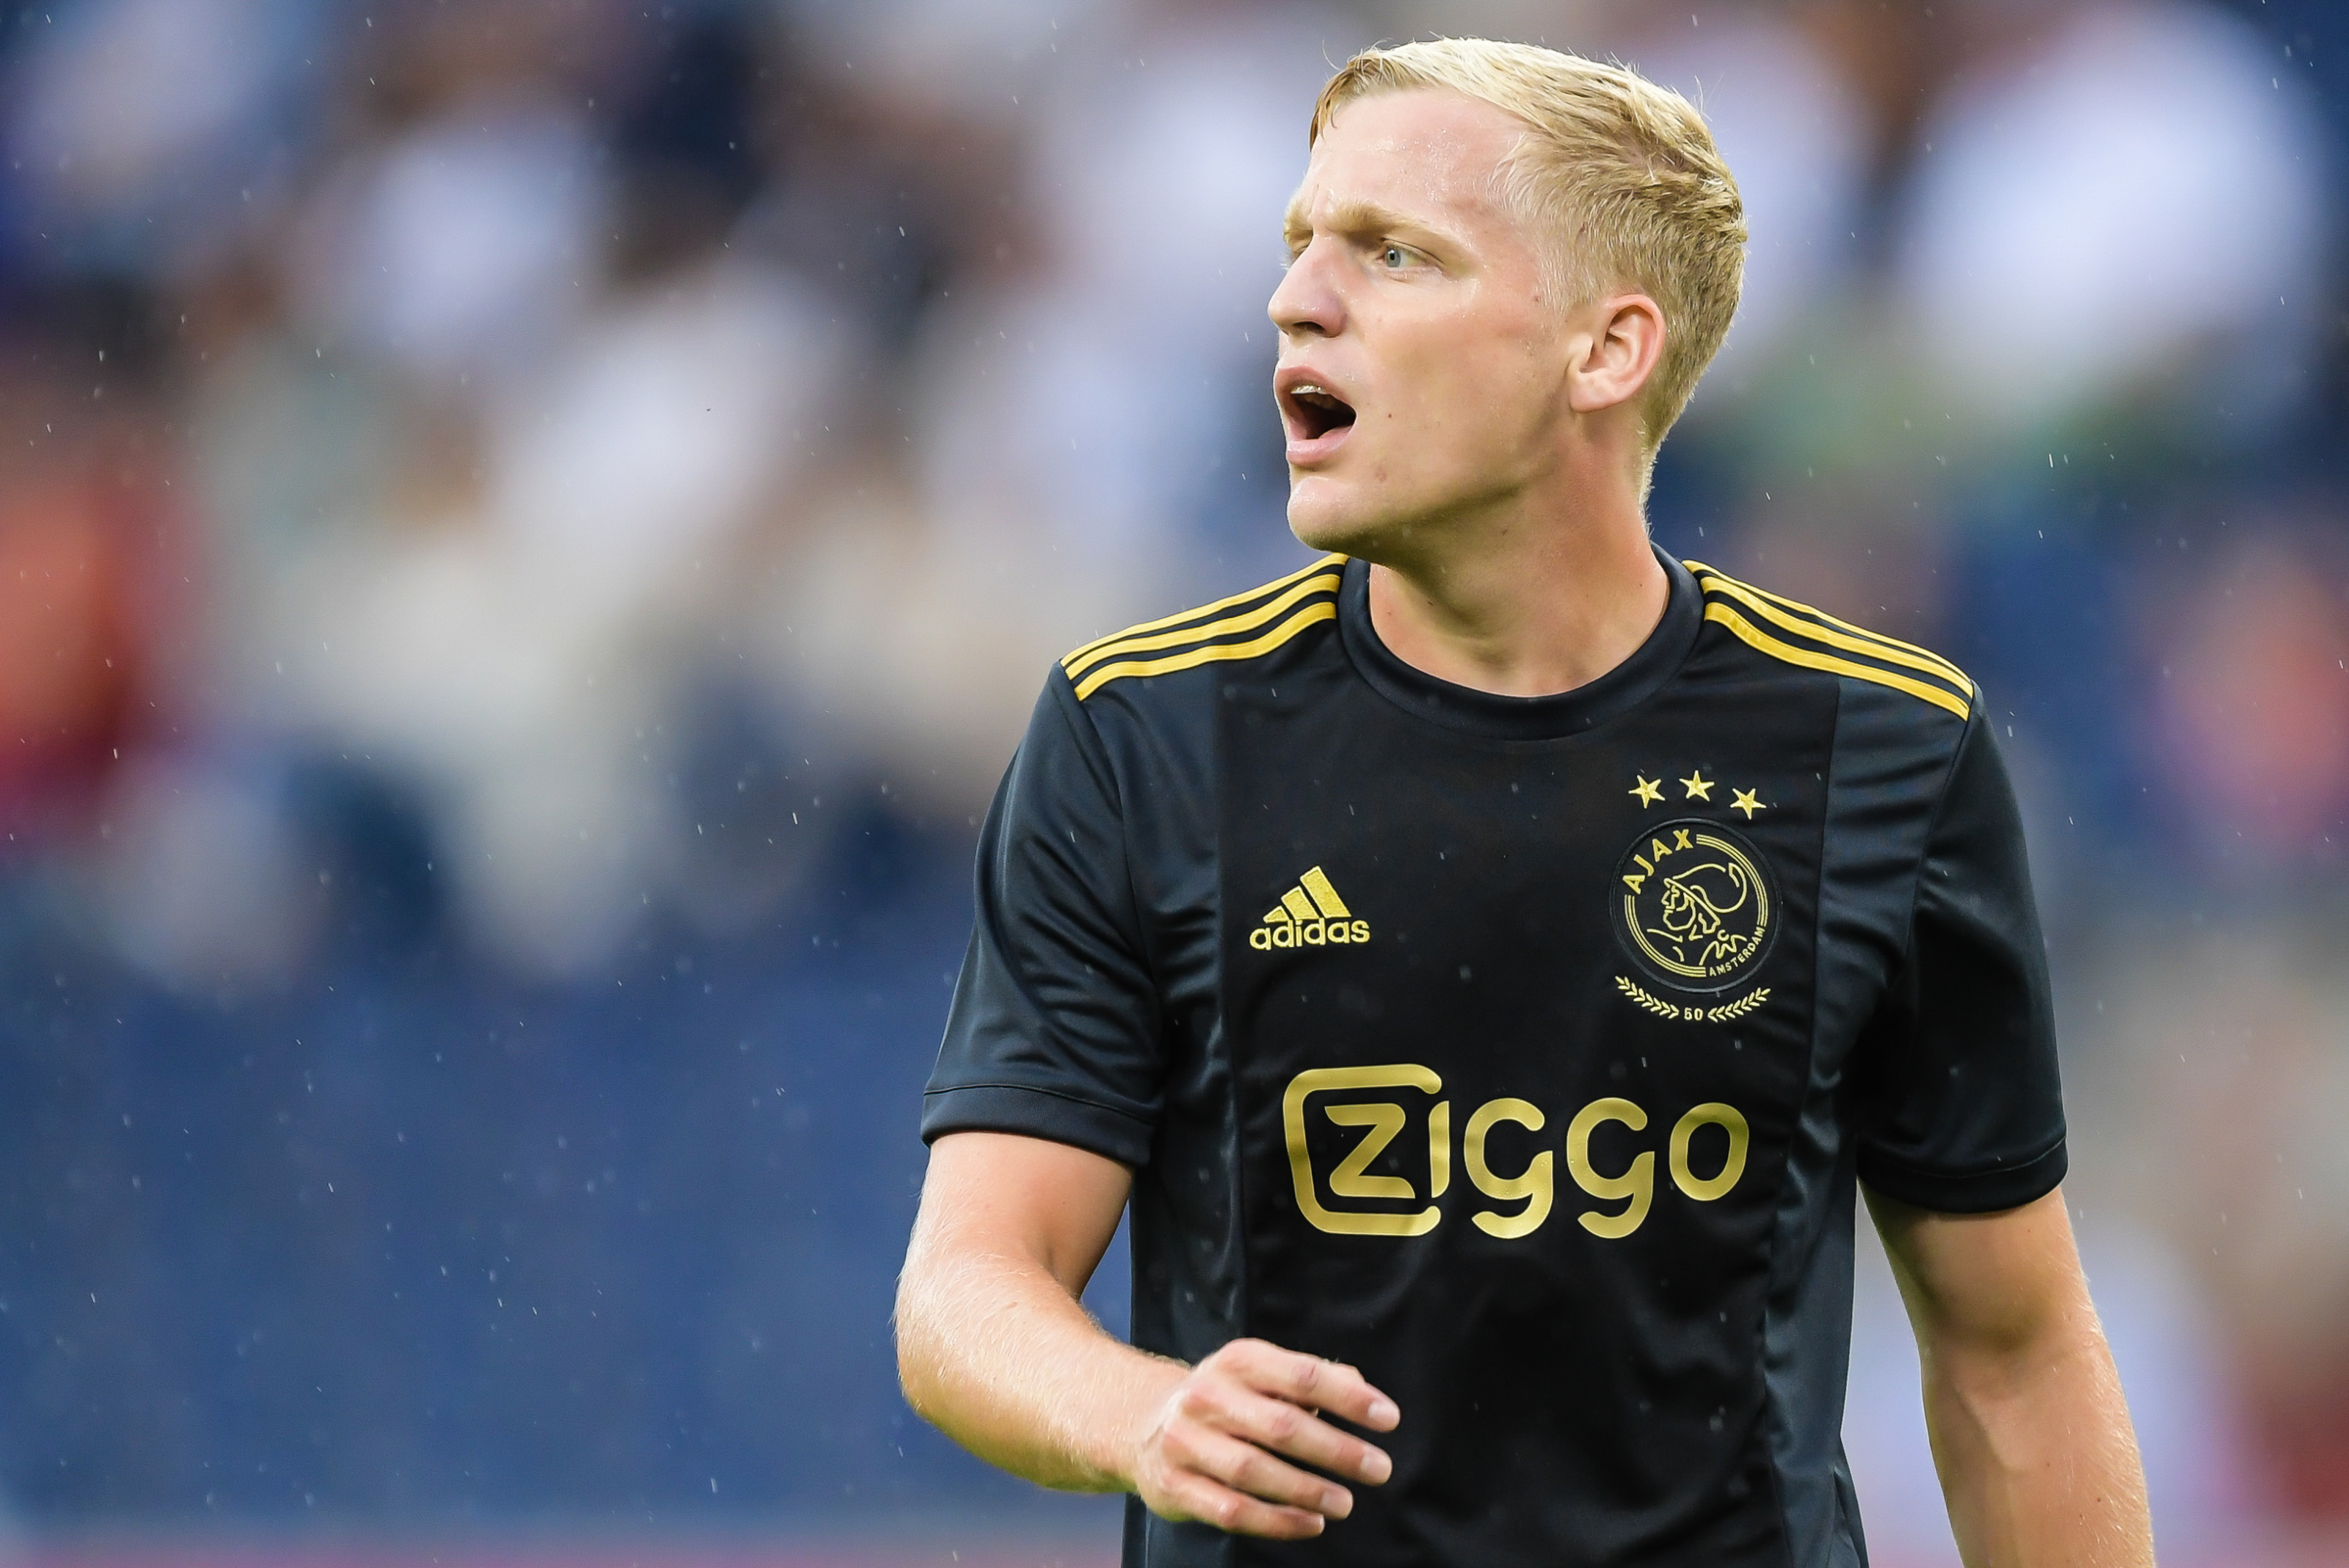 Donny van de Beek: Why do Manchester United want to sign the Ajax